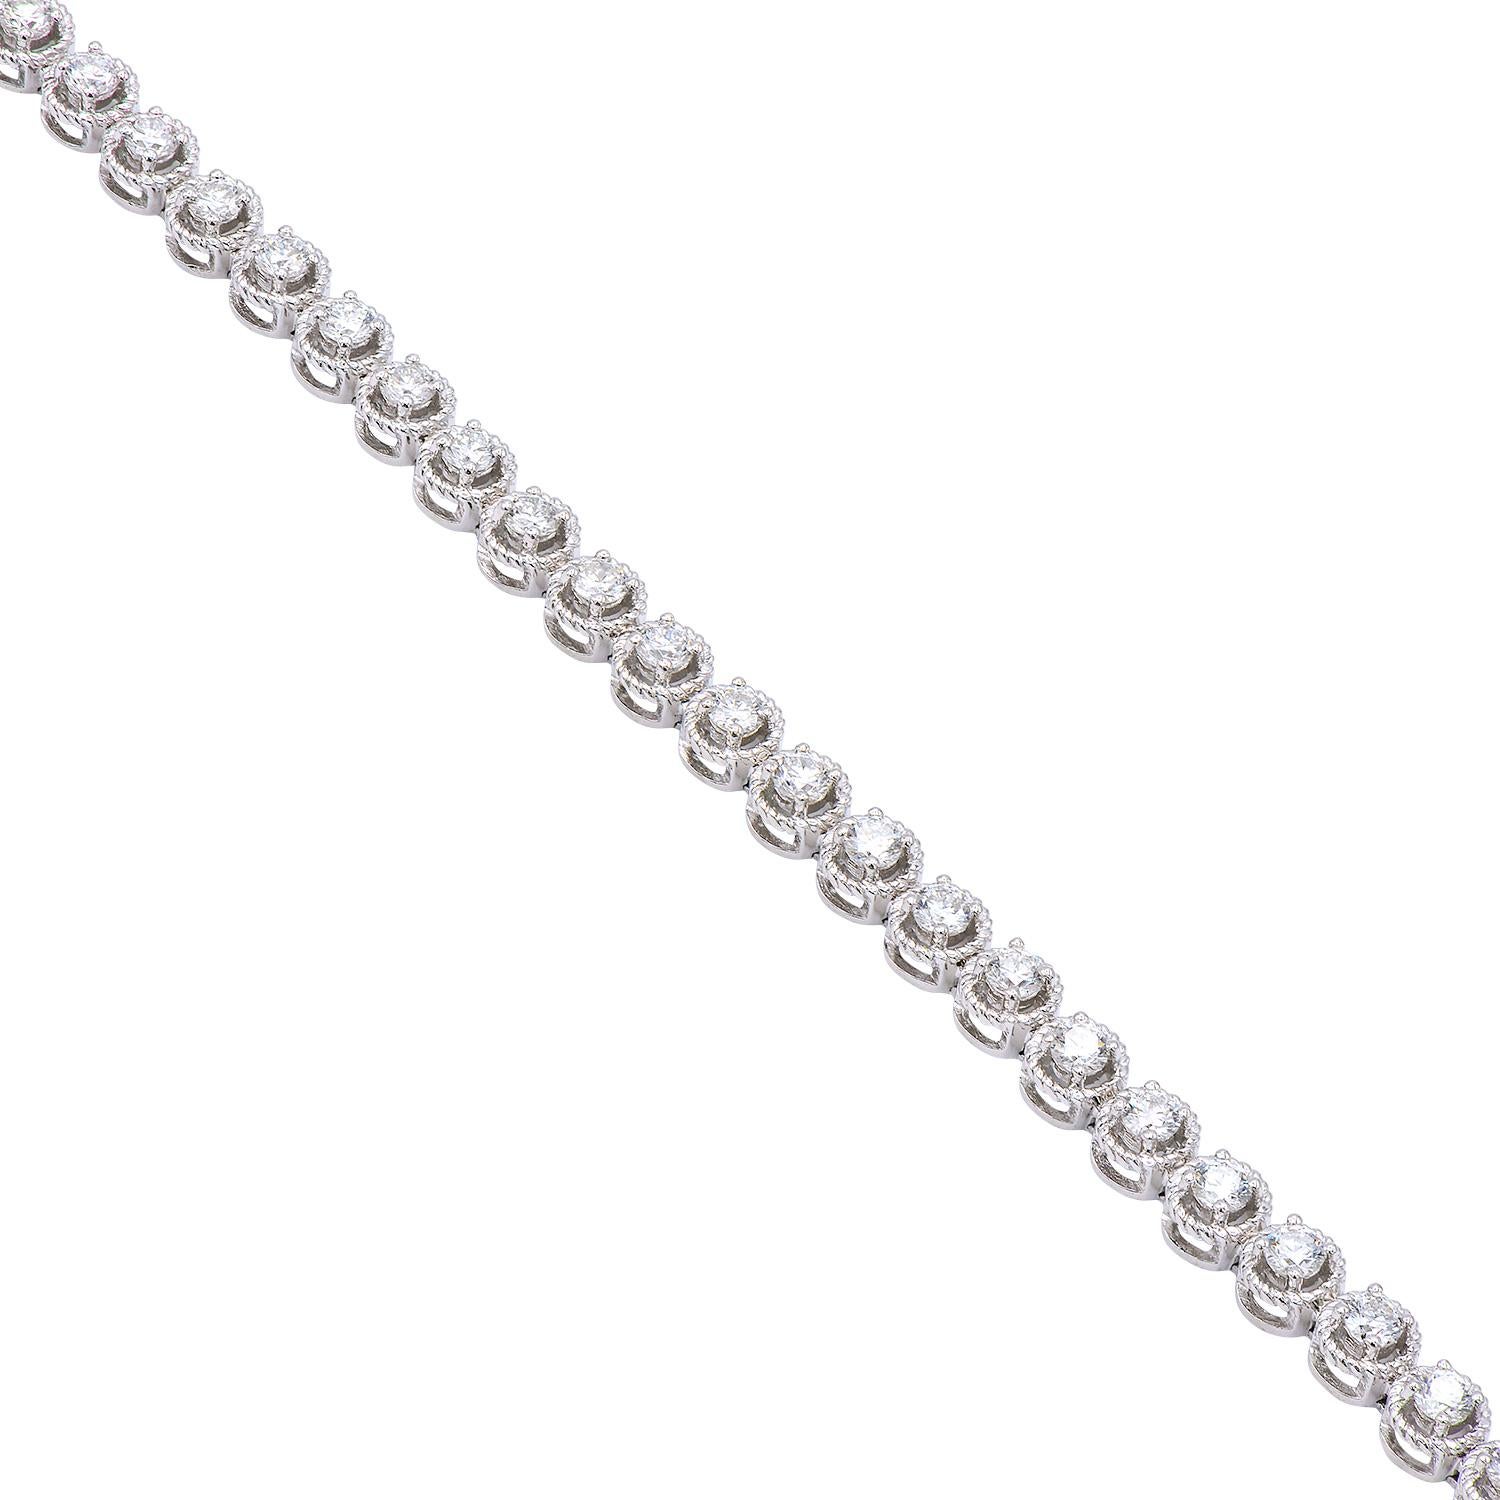 This 18 karat white gold bracelet uses a millgrain technique to add special detail to each of the 52 round VS2, G color diamonds. The 6.9 grams of gold expertly circle and enhance the 1.49 carats of diamonds to create a special and beautiful